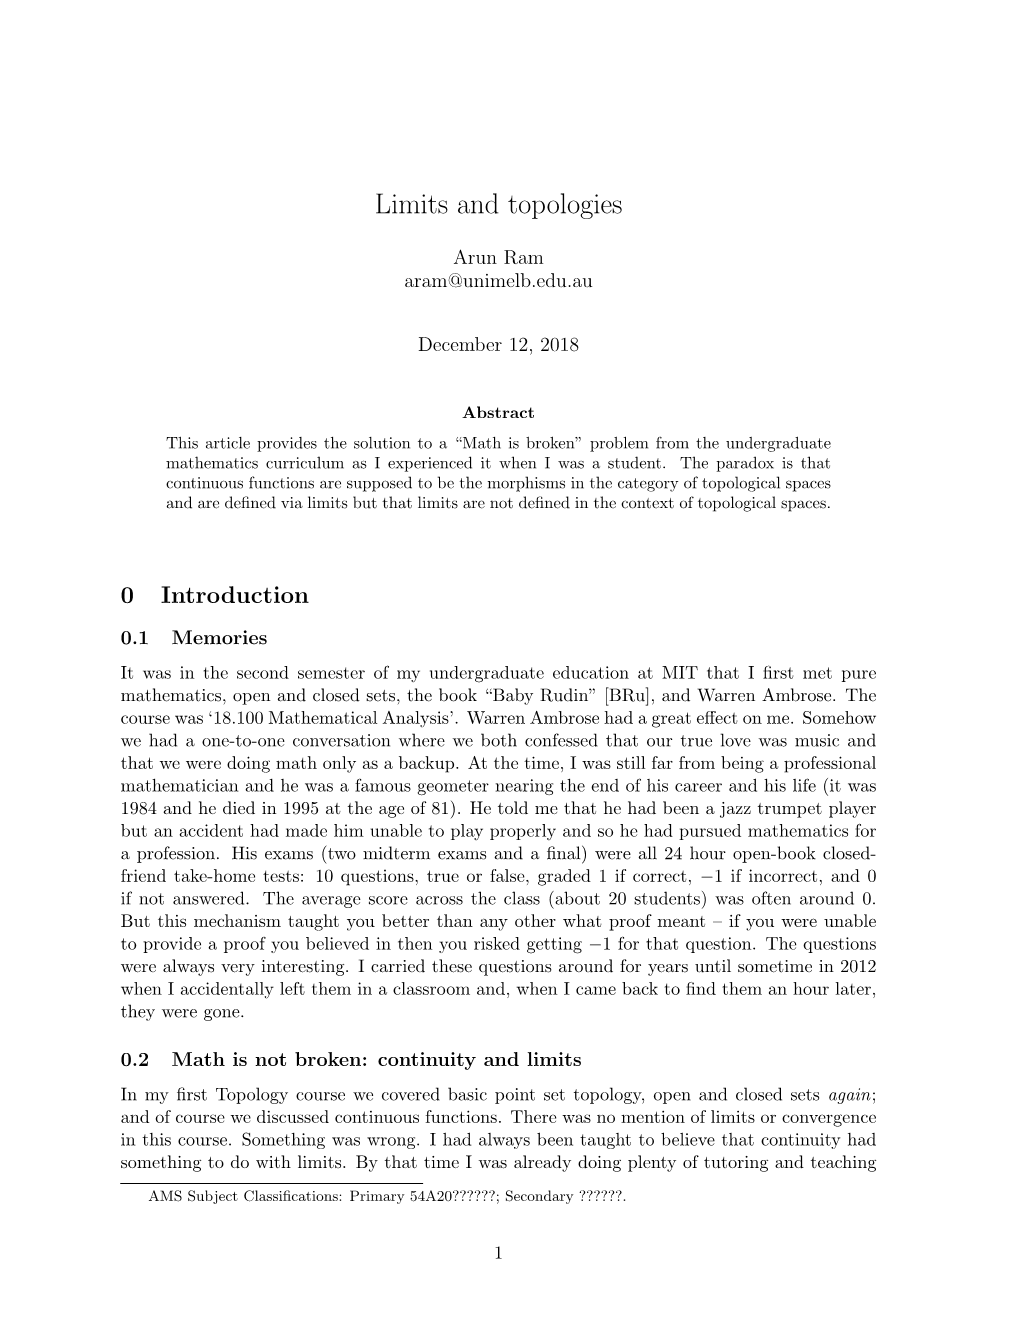 Limits and Topologies